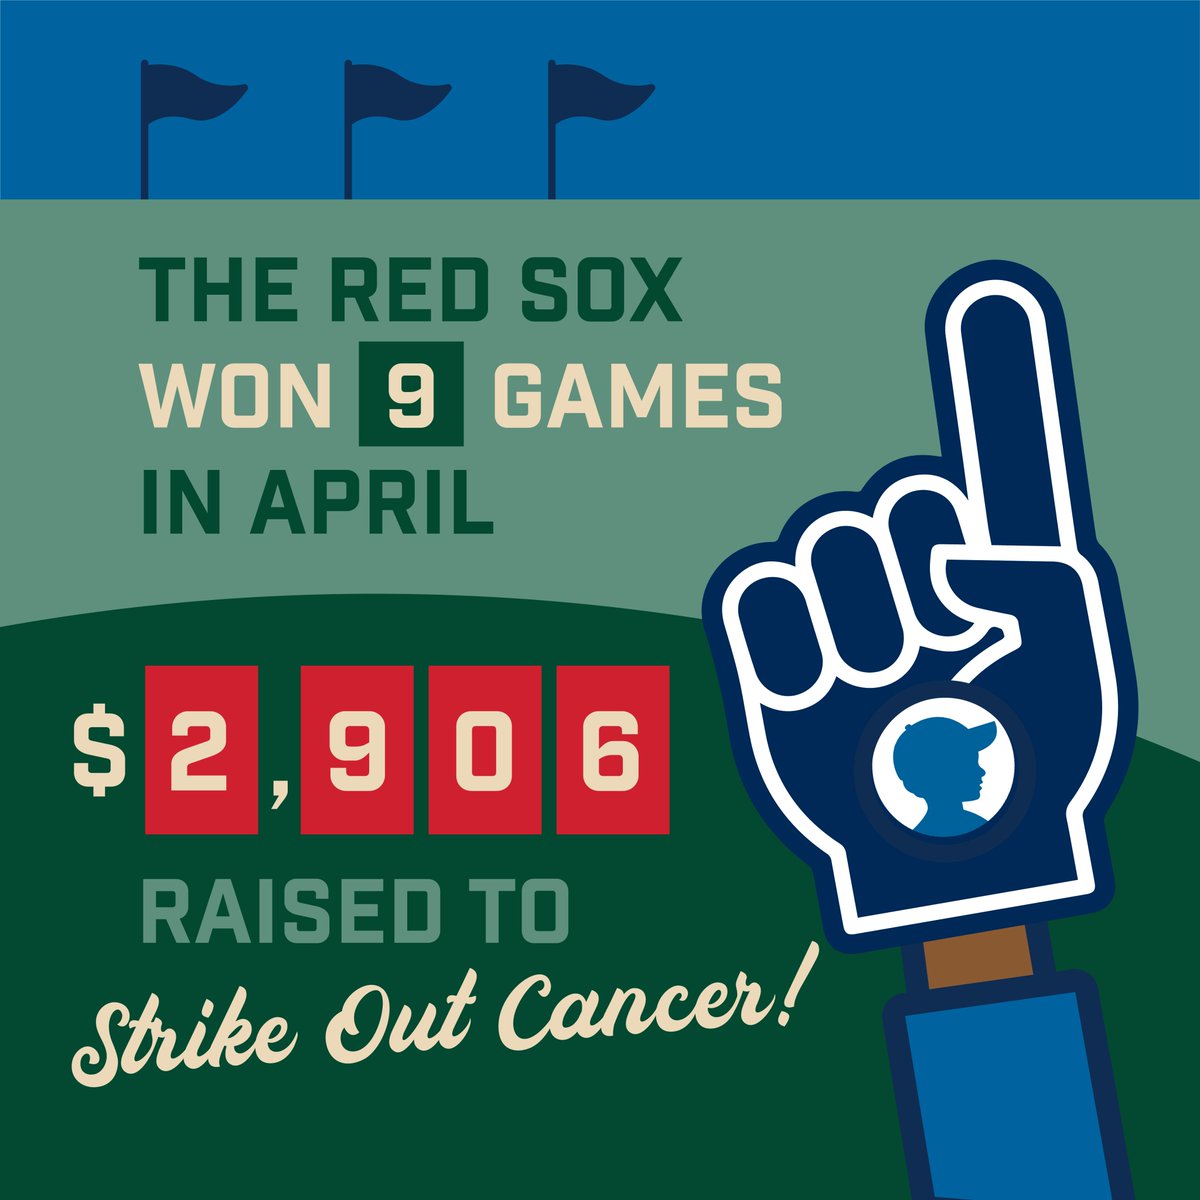 So I am giving $5/win. Please, @RedSox, make @TheJimmyFund take more of my money. https://t.co/TvrsJ8fNyM